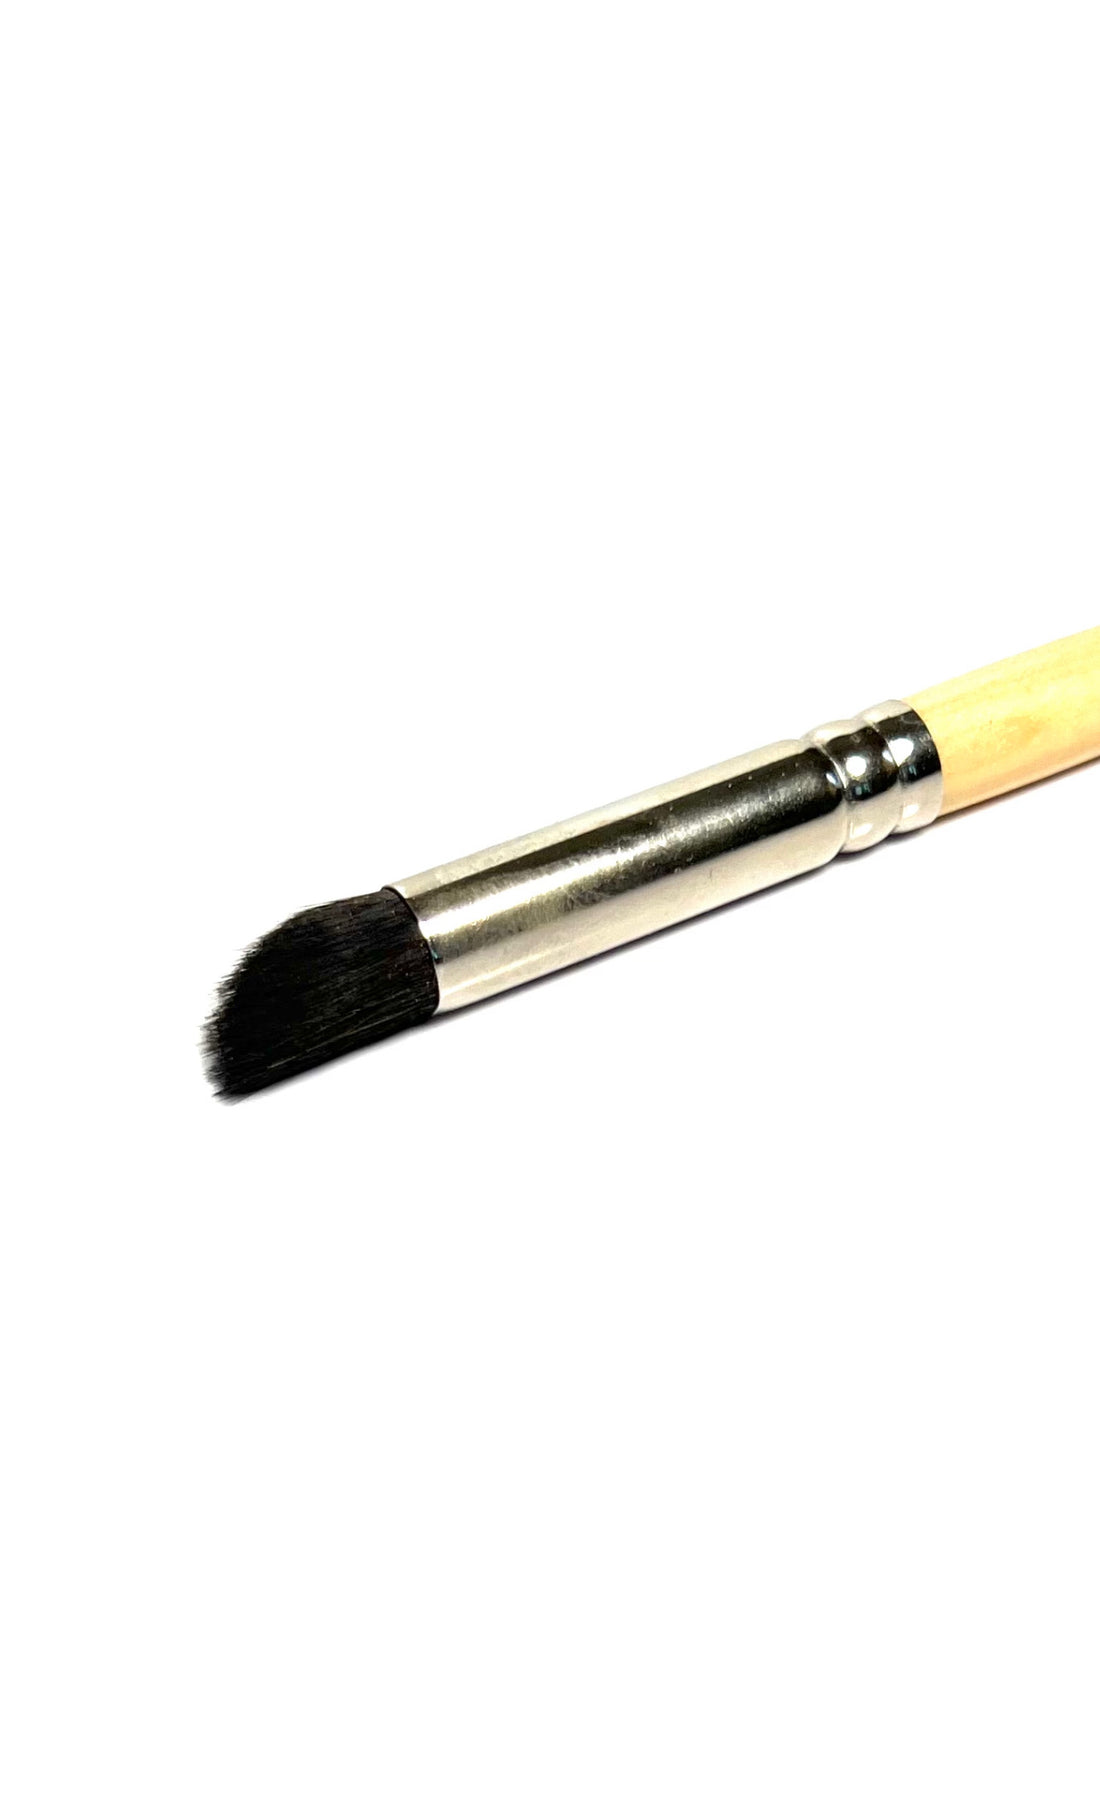 THE Everything Eye Brush. Super Lux Eye Shadow Brush that does it ALL!